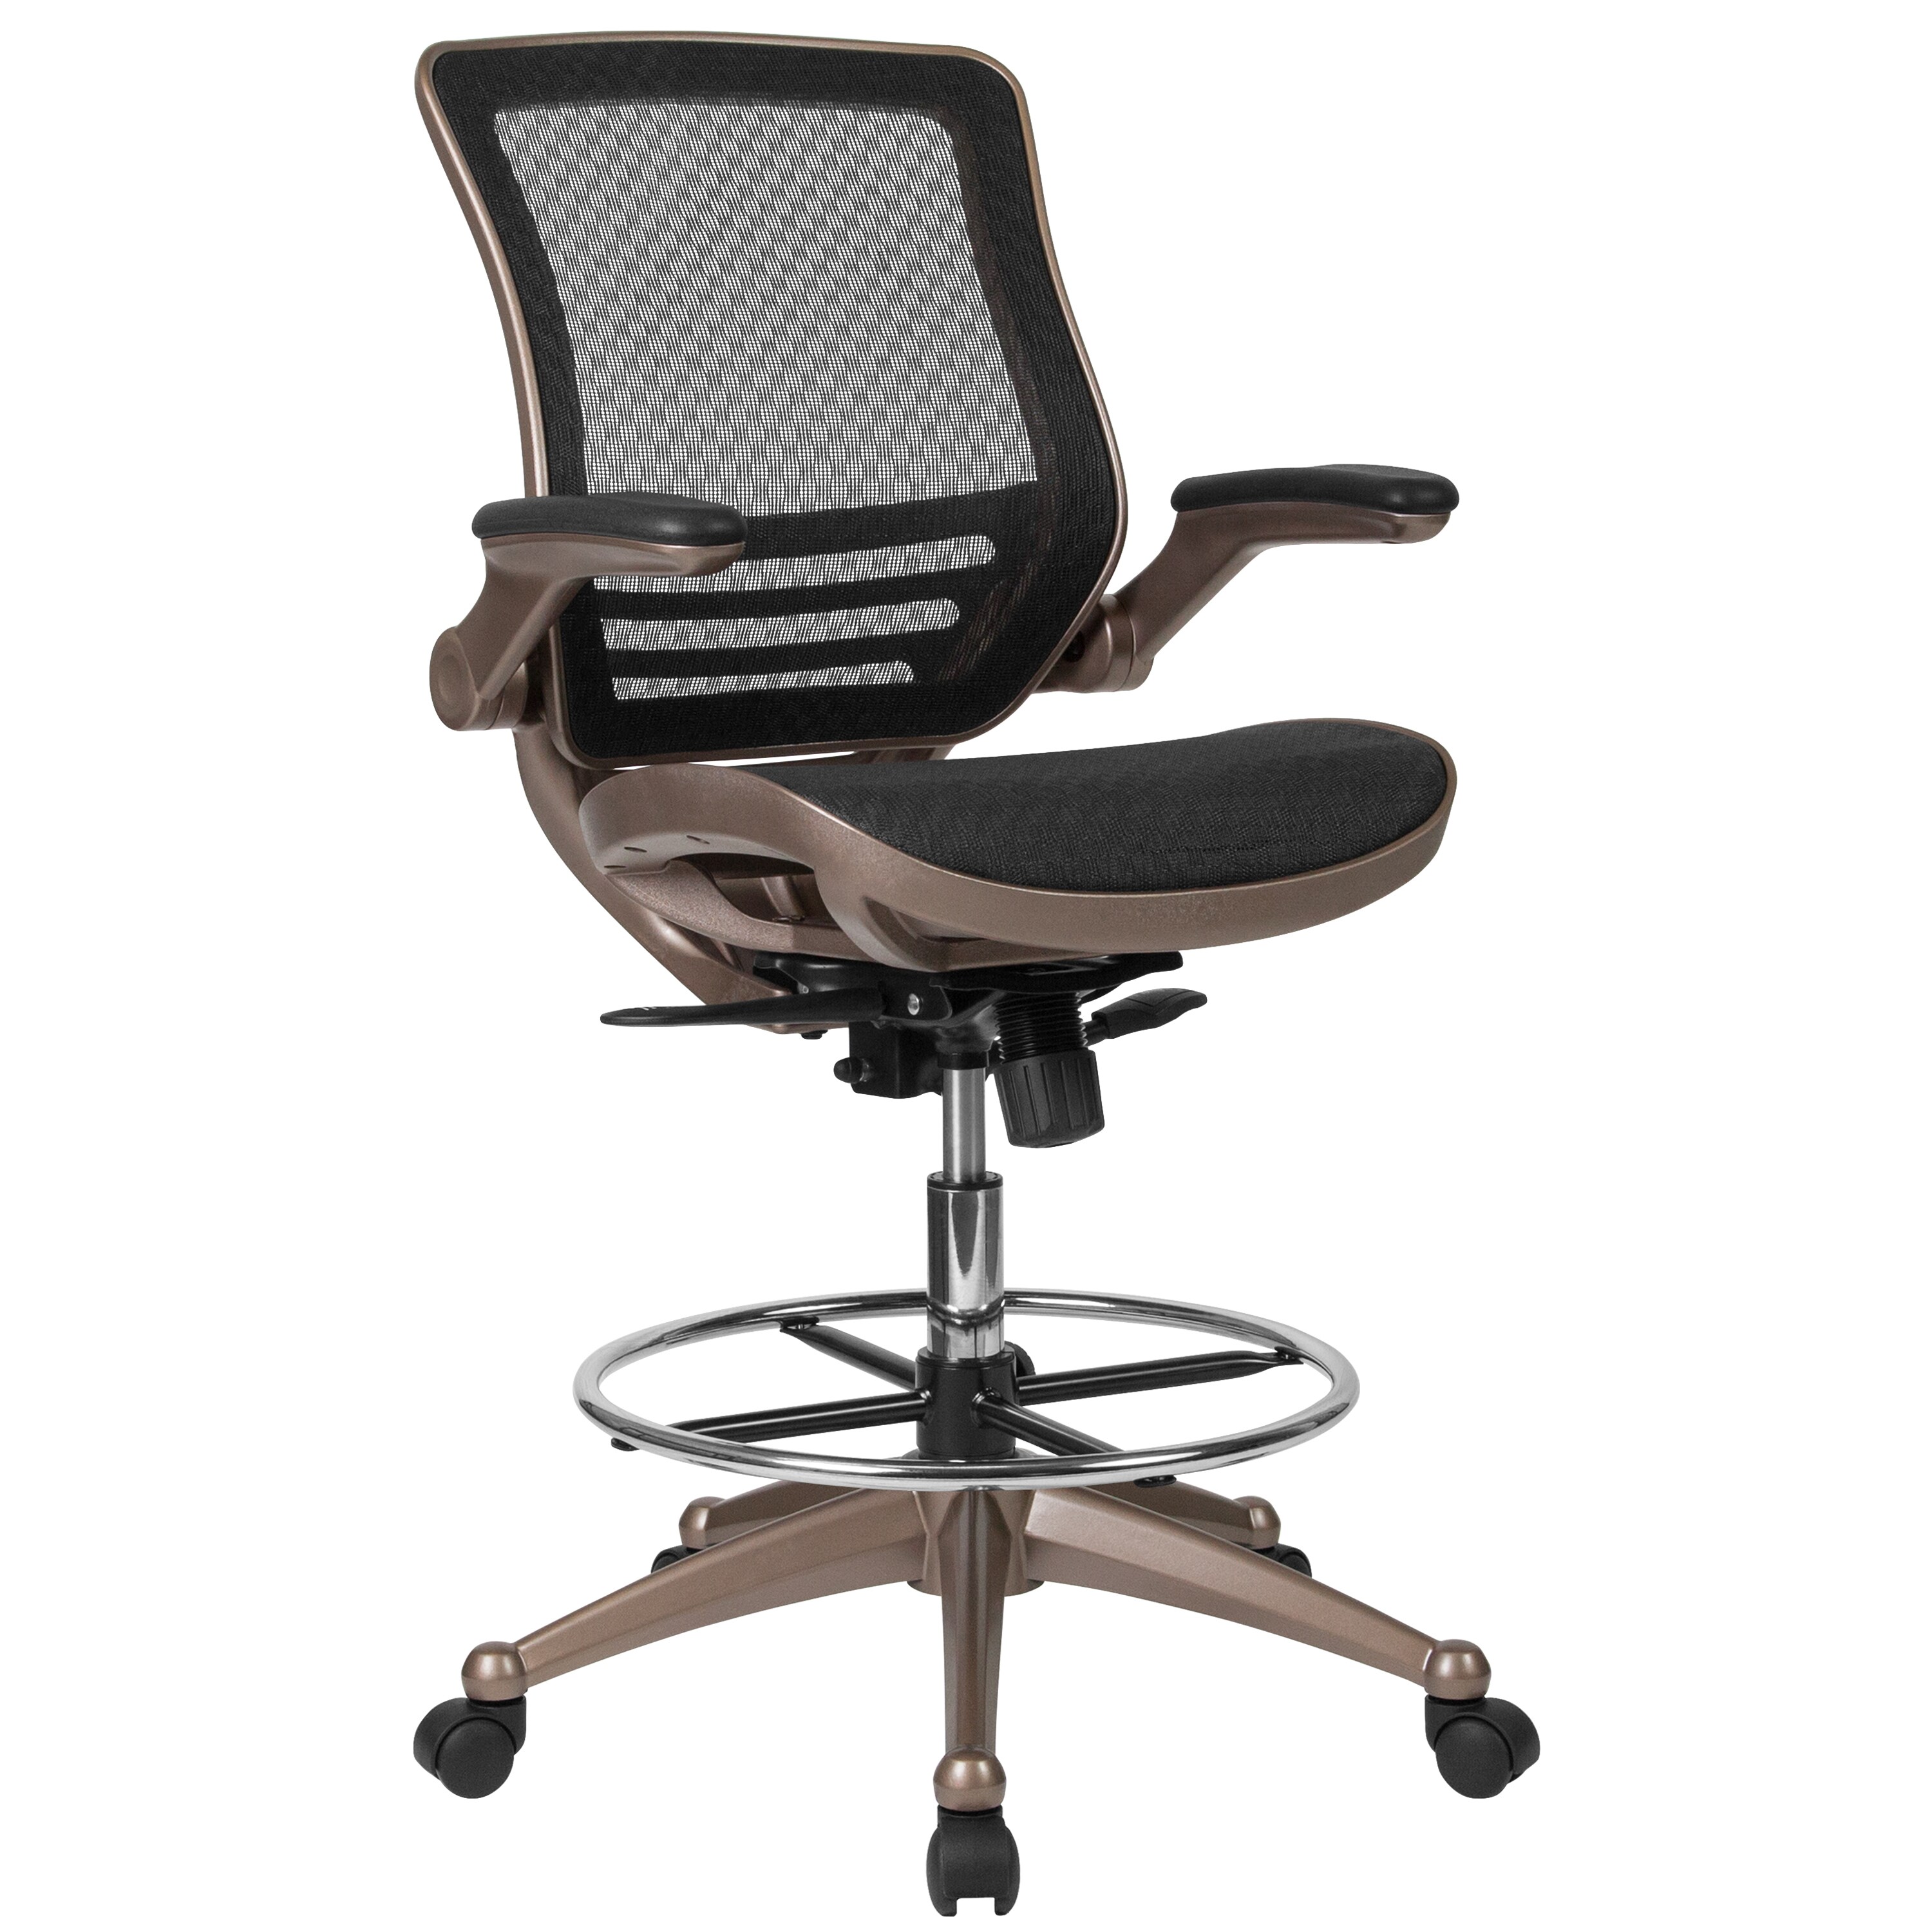 Drafting Chair Tall Office Chair Adjustable Height with Arms Foot Rest Back Support Rolling Swivel Desk Chair Mesh Drafting Stool for Adults,Black 